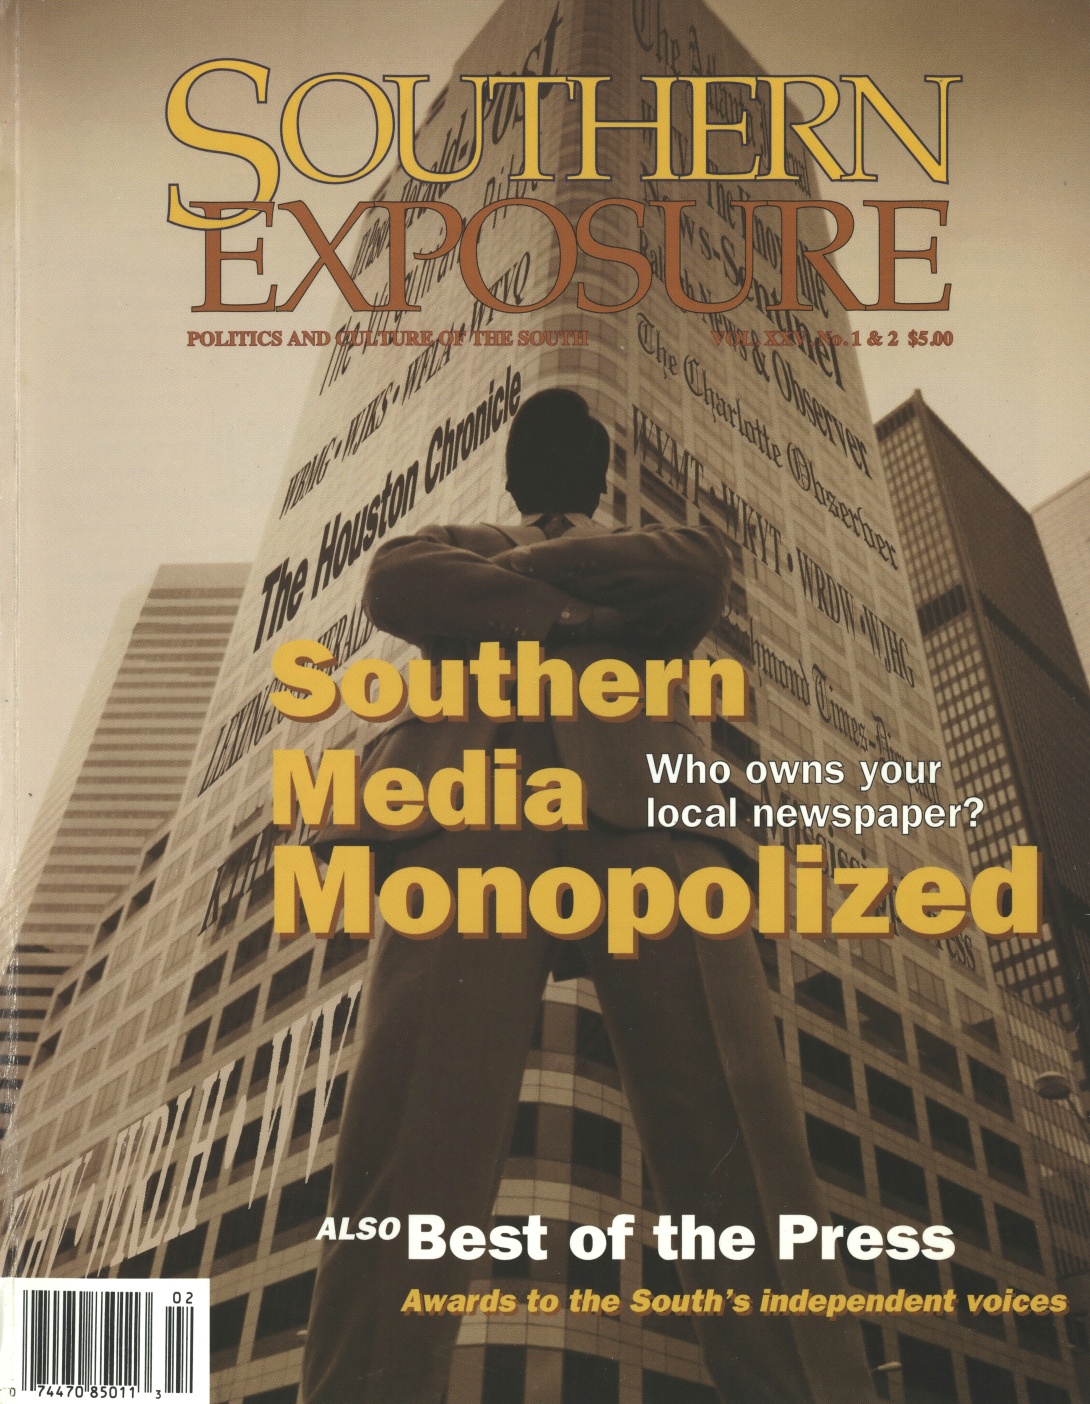 Magazine cover with photo of high-rise building with the names of newspapers including The Houston Chronicle and Charlotte Observer, text reads "Southern Media Monopolized: Who owns your local newspaper?"